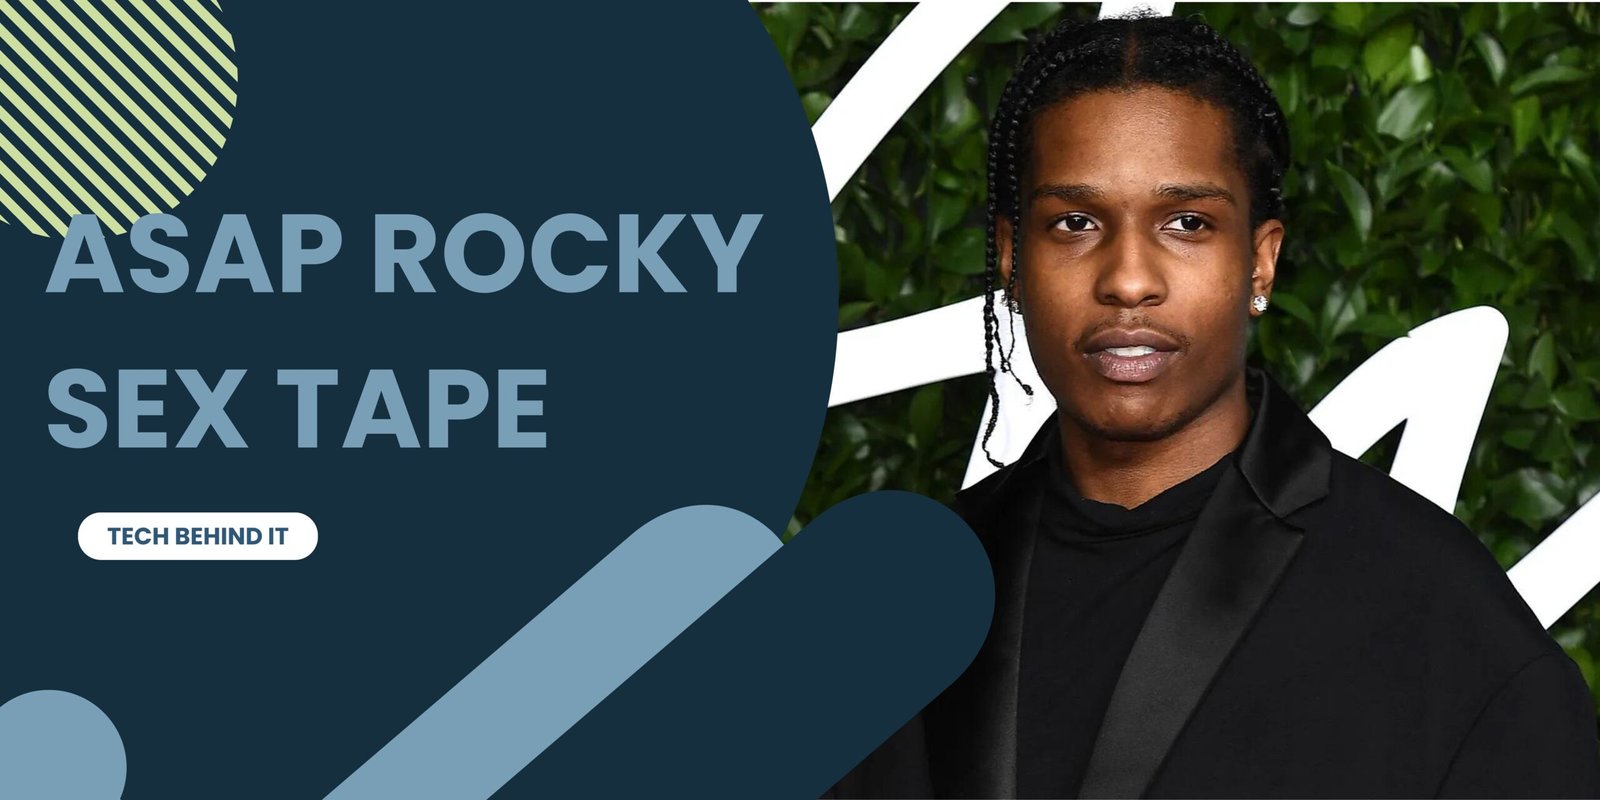 From Mixtapes to Mainstream: The ASAP Rocky Sex Tape